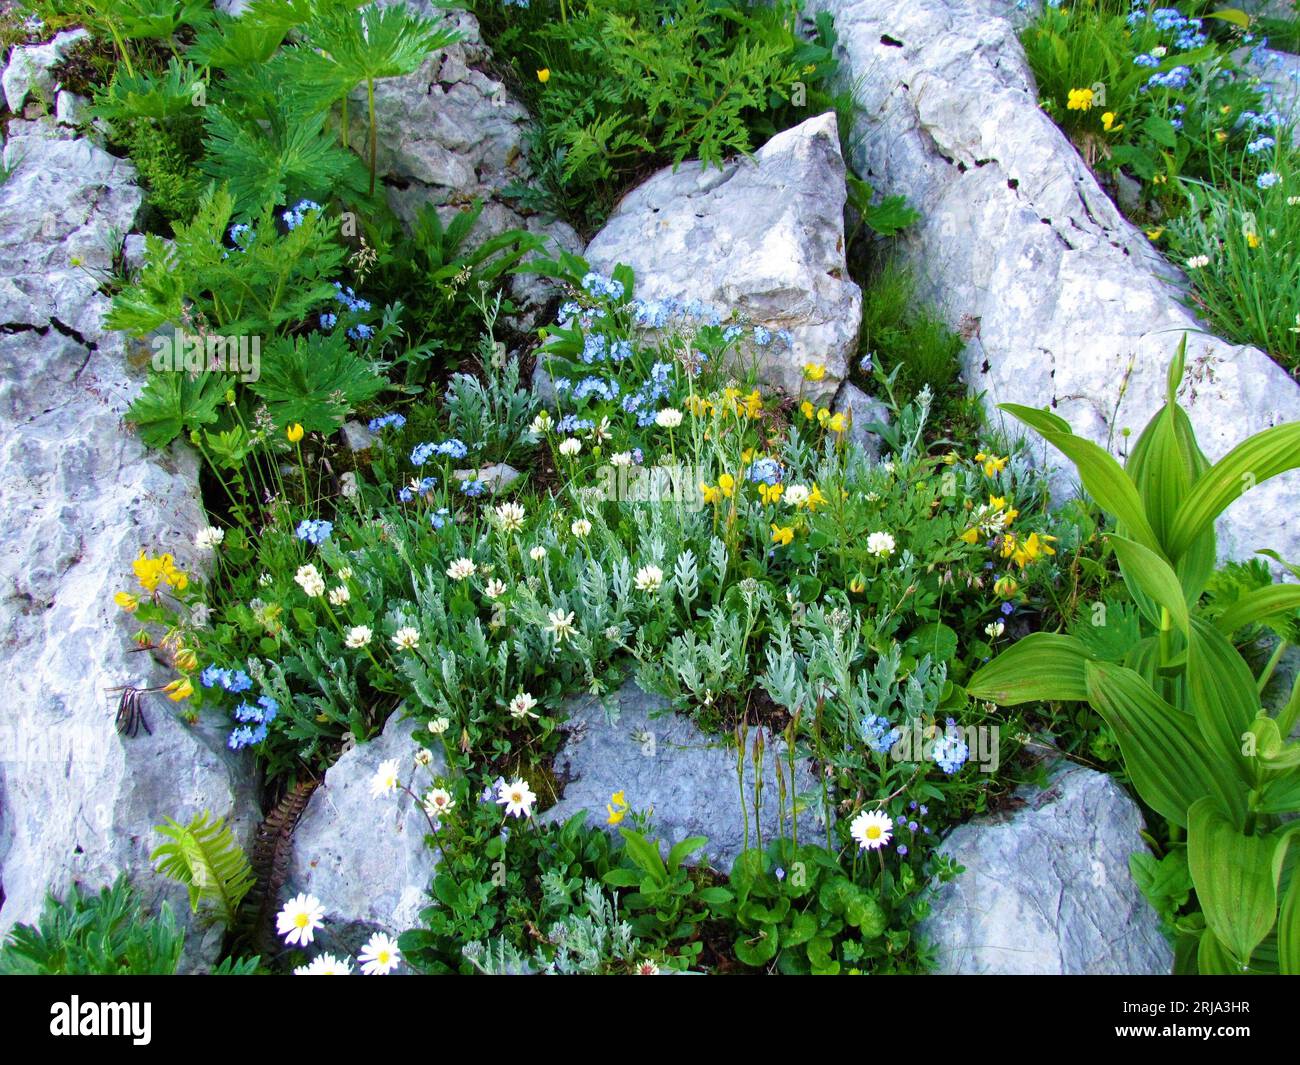 Colorful wild garden in the rocks with blue alpine forget-me-not (Myosotis alpestris) and othe white and yellow flowers Stock Photo